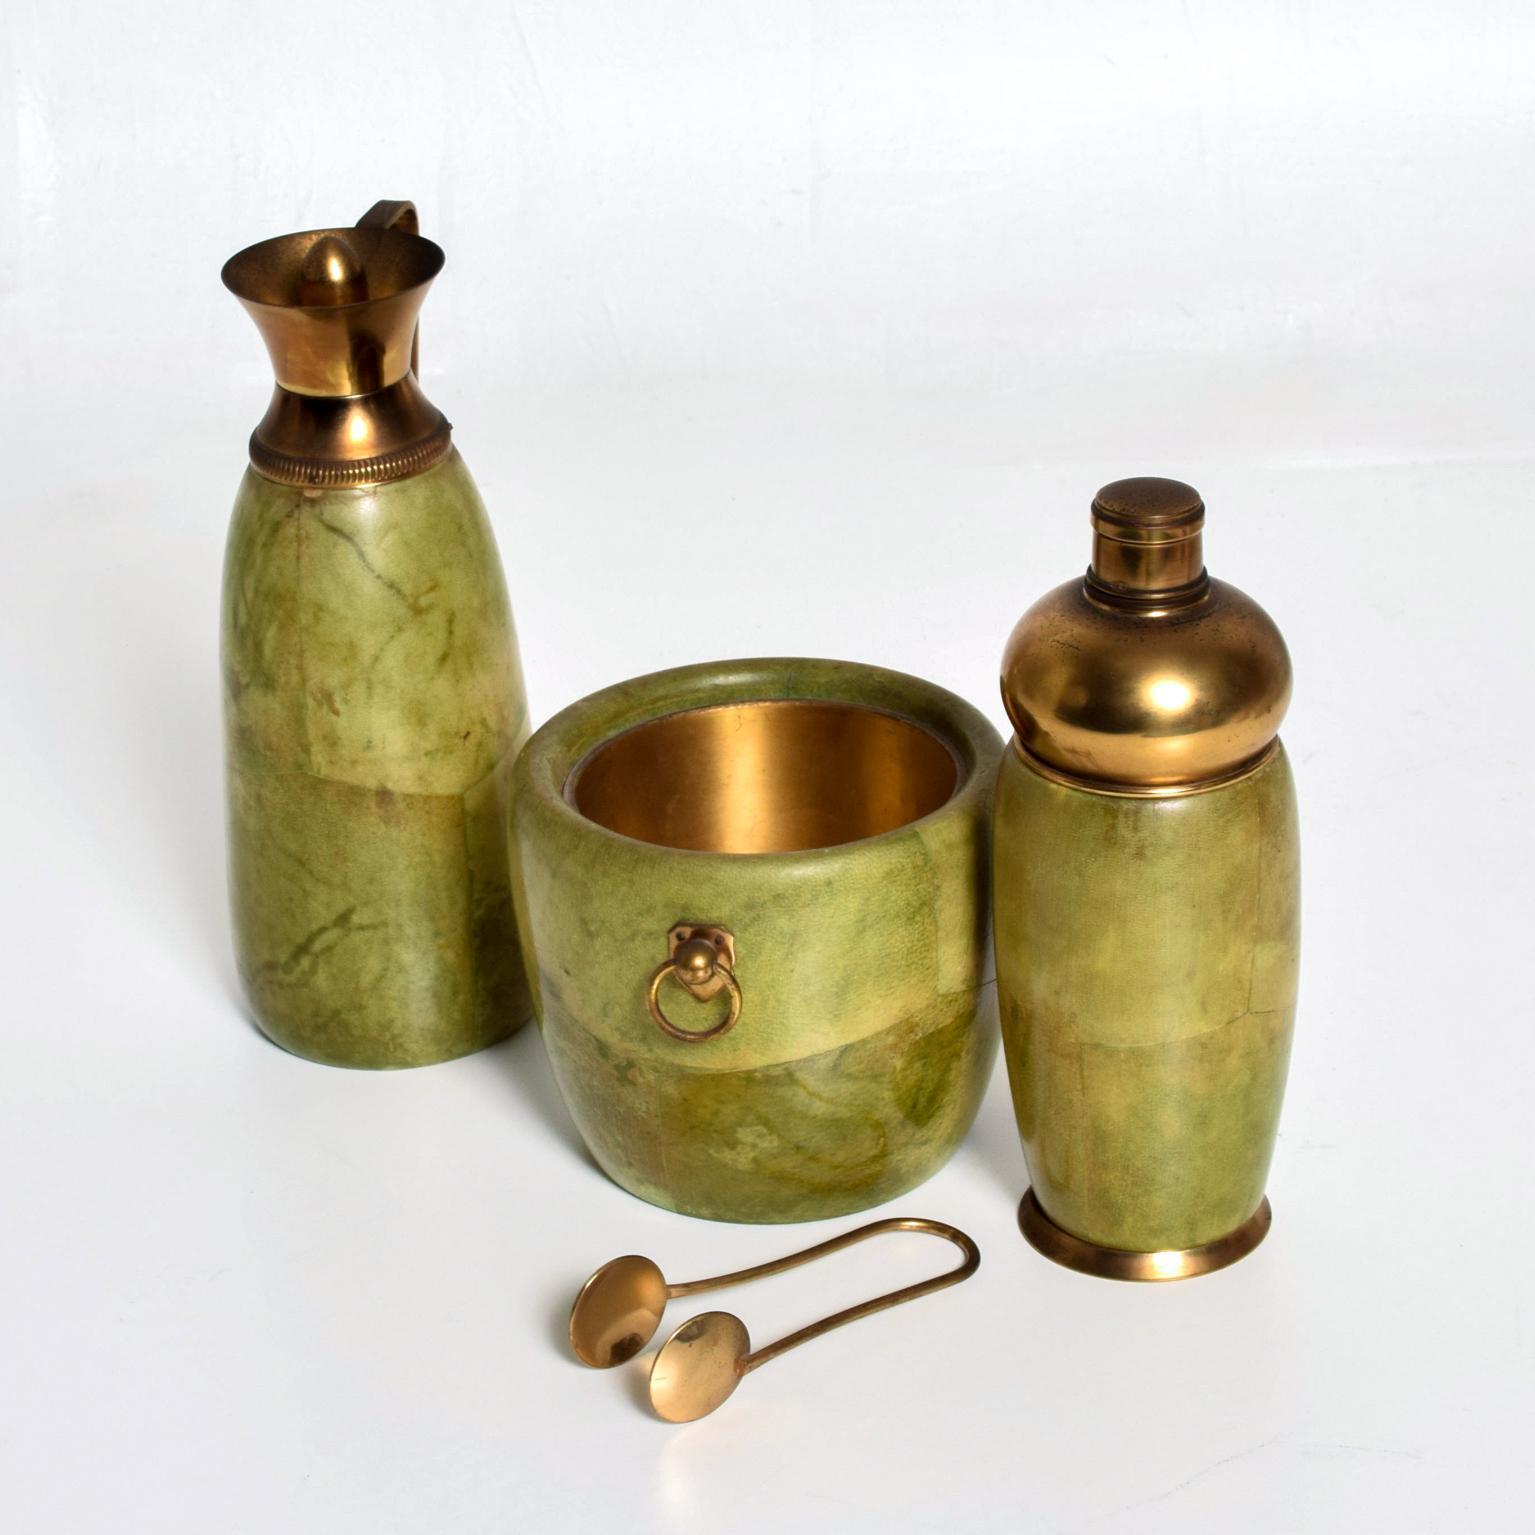 We are pleased to offer for your consideration a beautiful bar set designed by Aldo Tura for MACABO. Made in Italy circa the 1950s. Solid wood wrapped in goatskin. Original finish in amazing light green color. Brass accents with original vintage